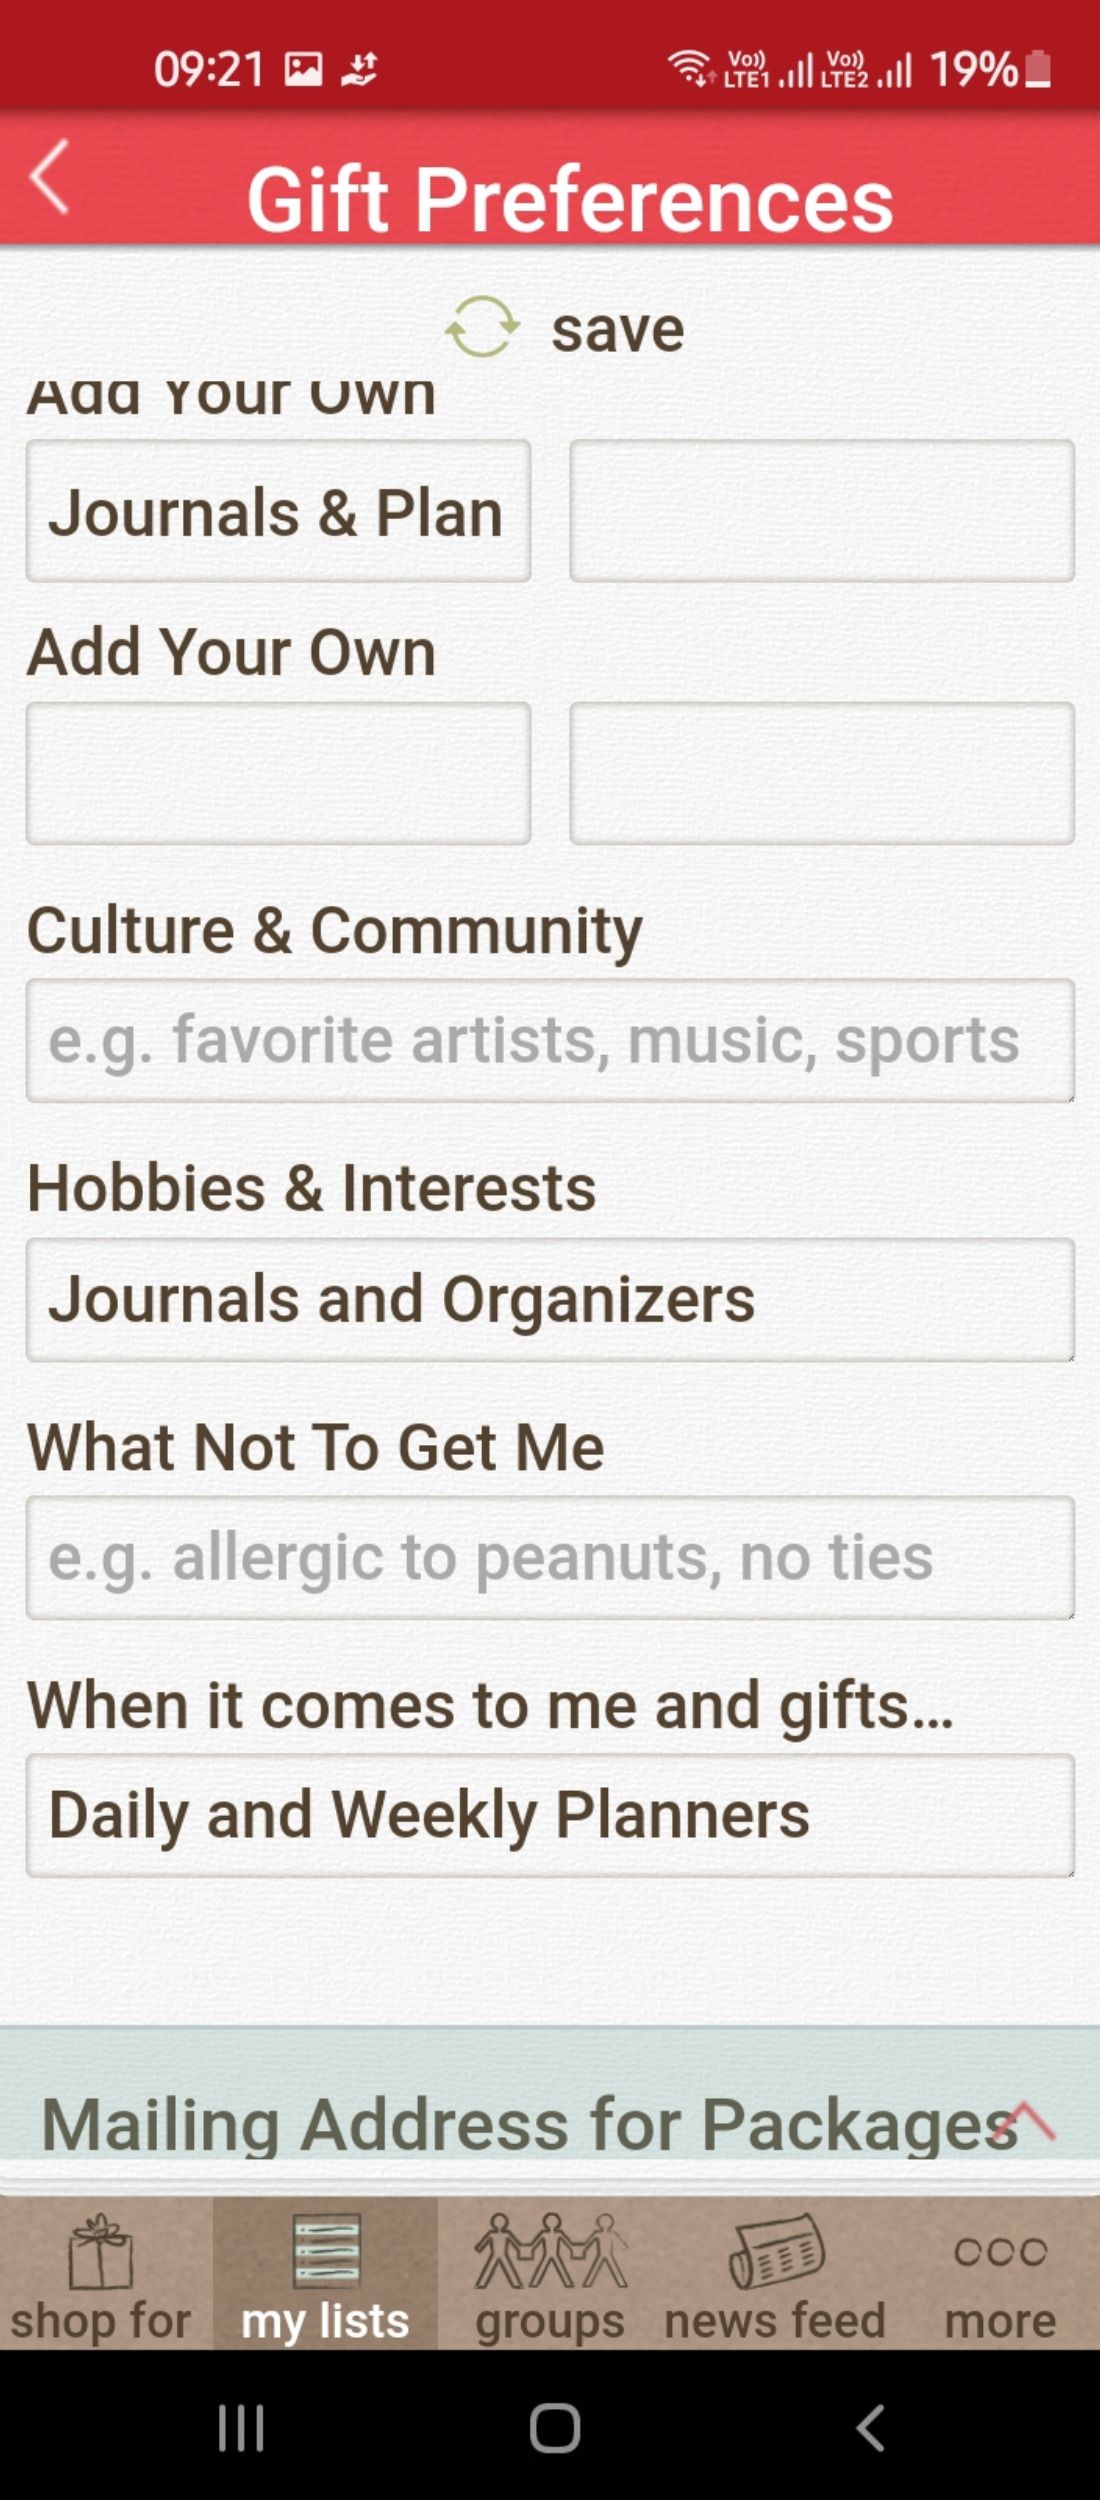 Gift preferences section in the Gifster app